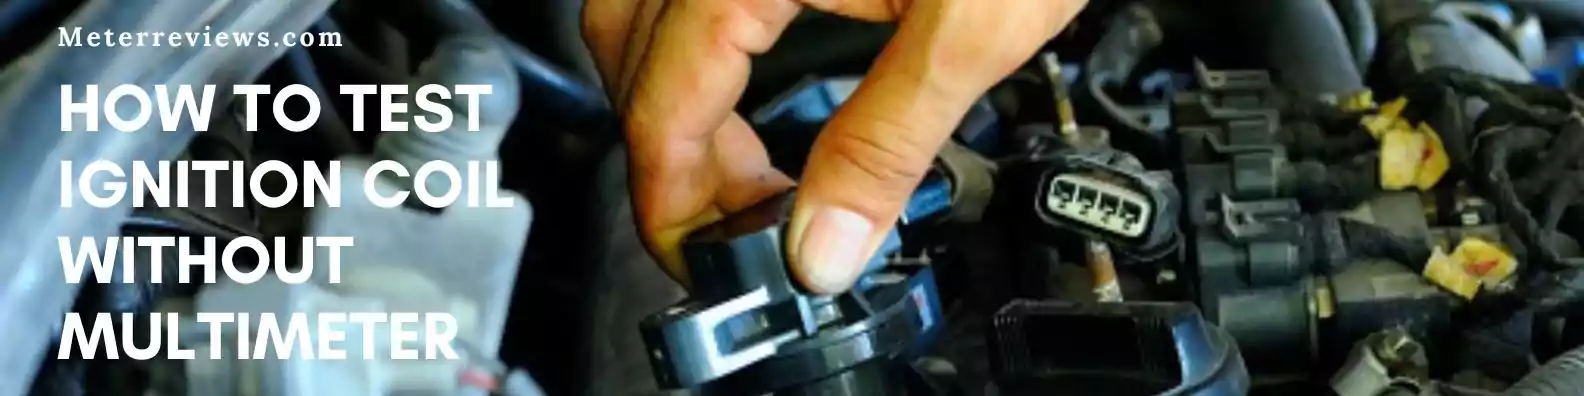 how to test ignition coil without multimeter